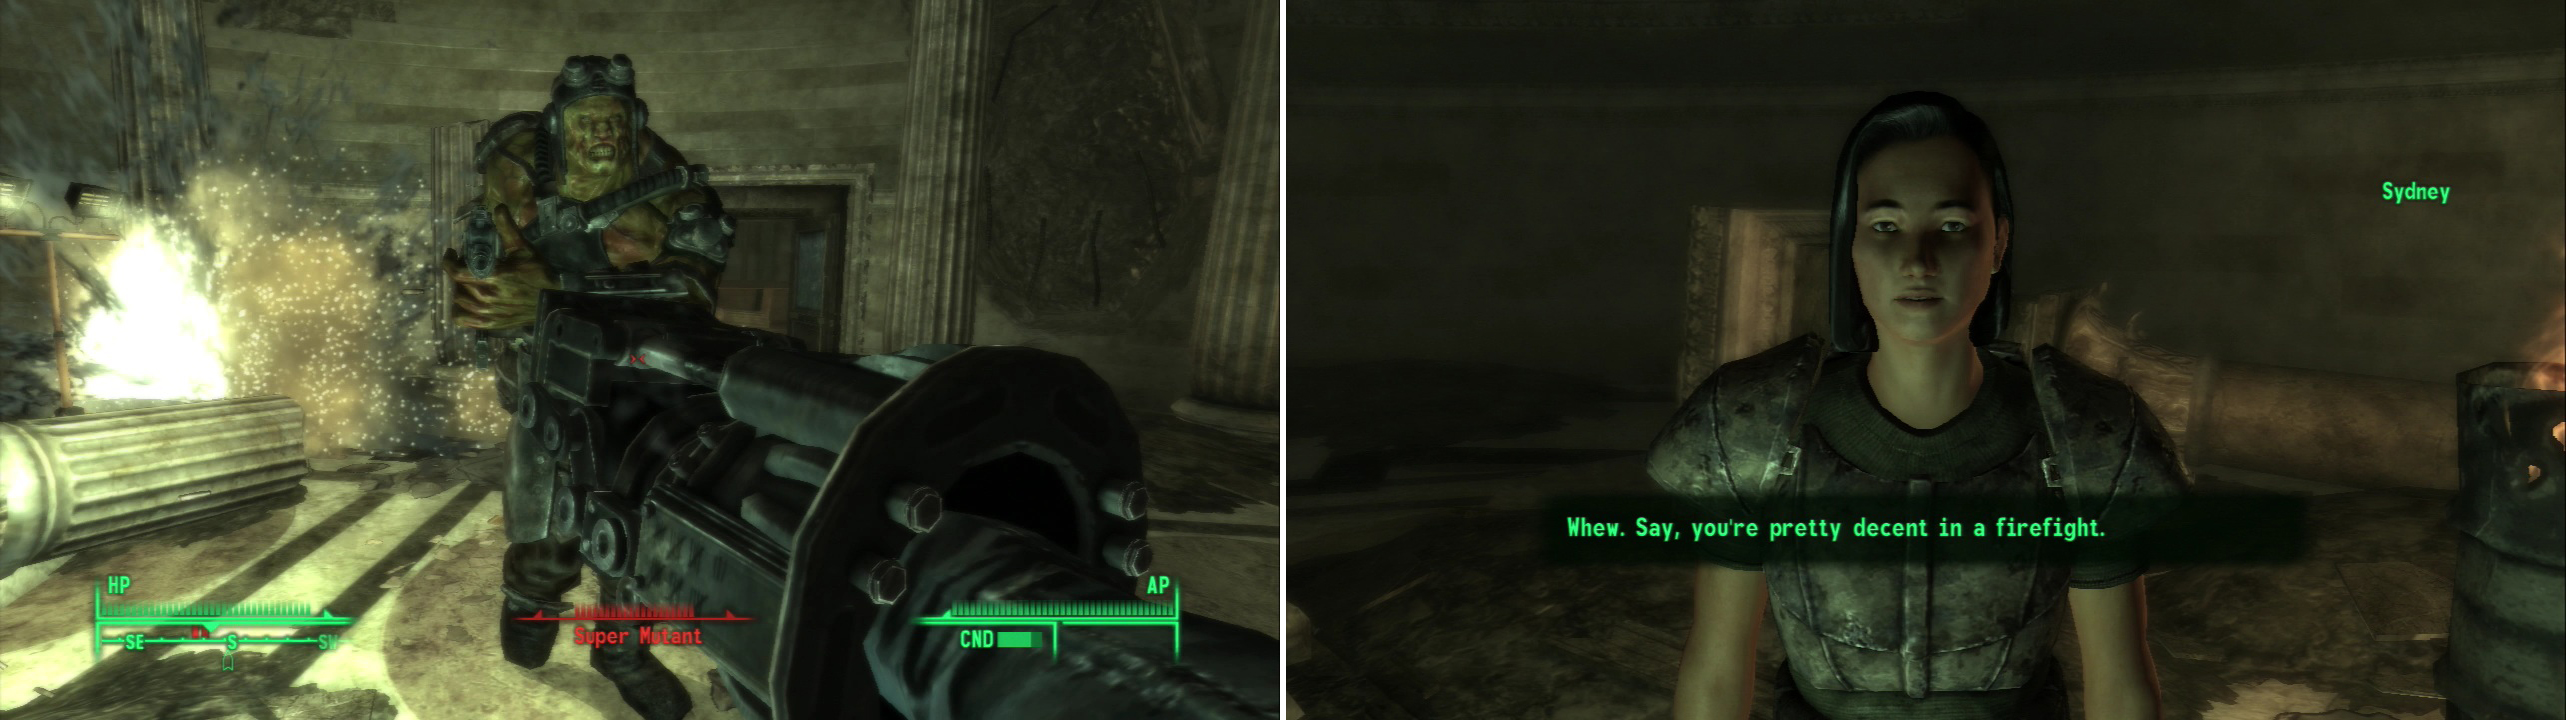 Help Sydney defend the rotunda from the Super Mutant onslaught (left), then discuss how the two of you will go about looting the National Archives building (right).